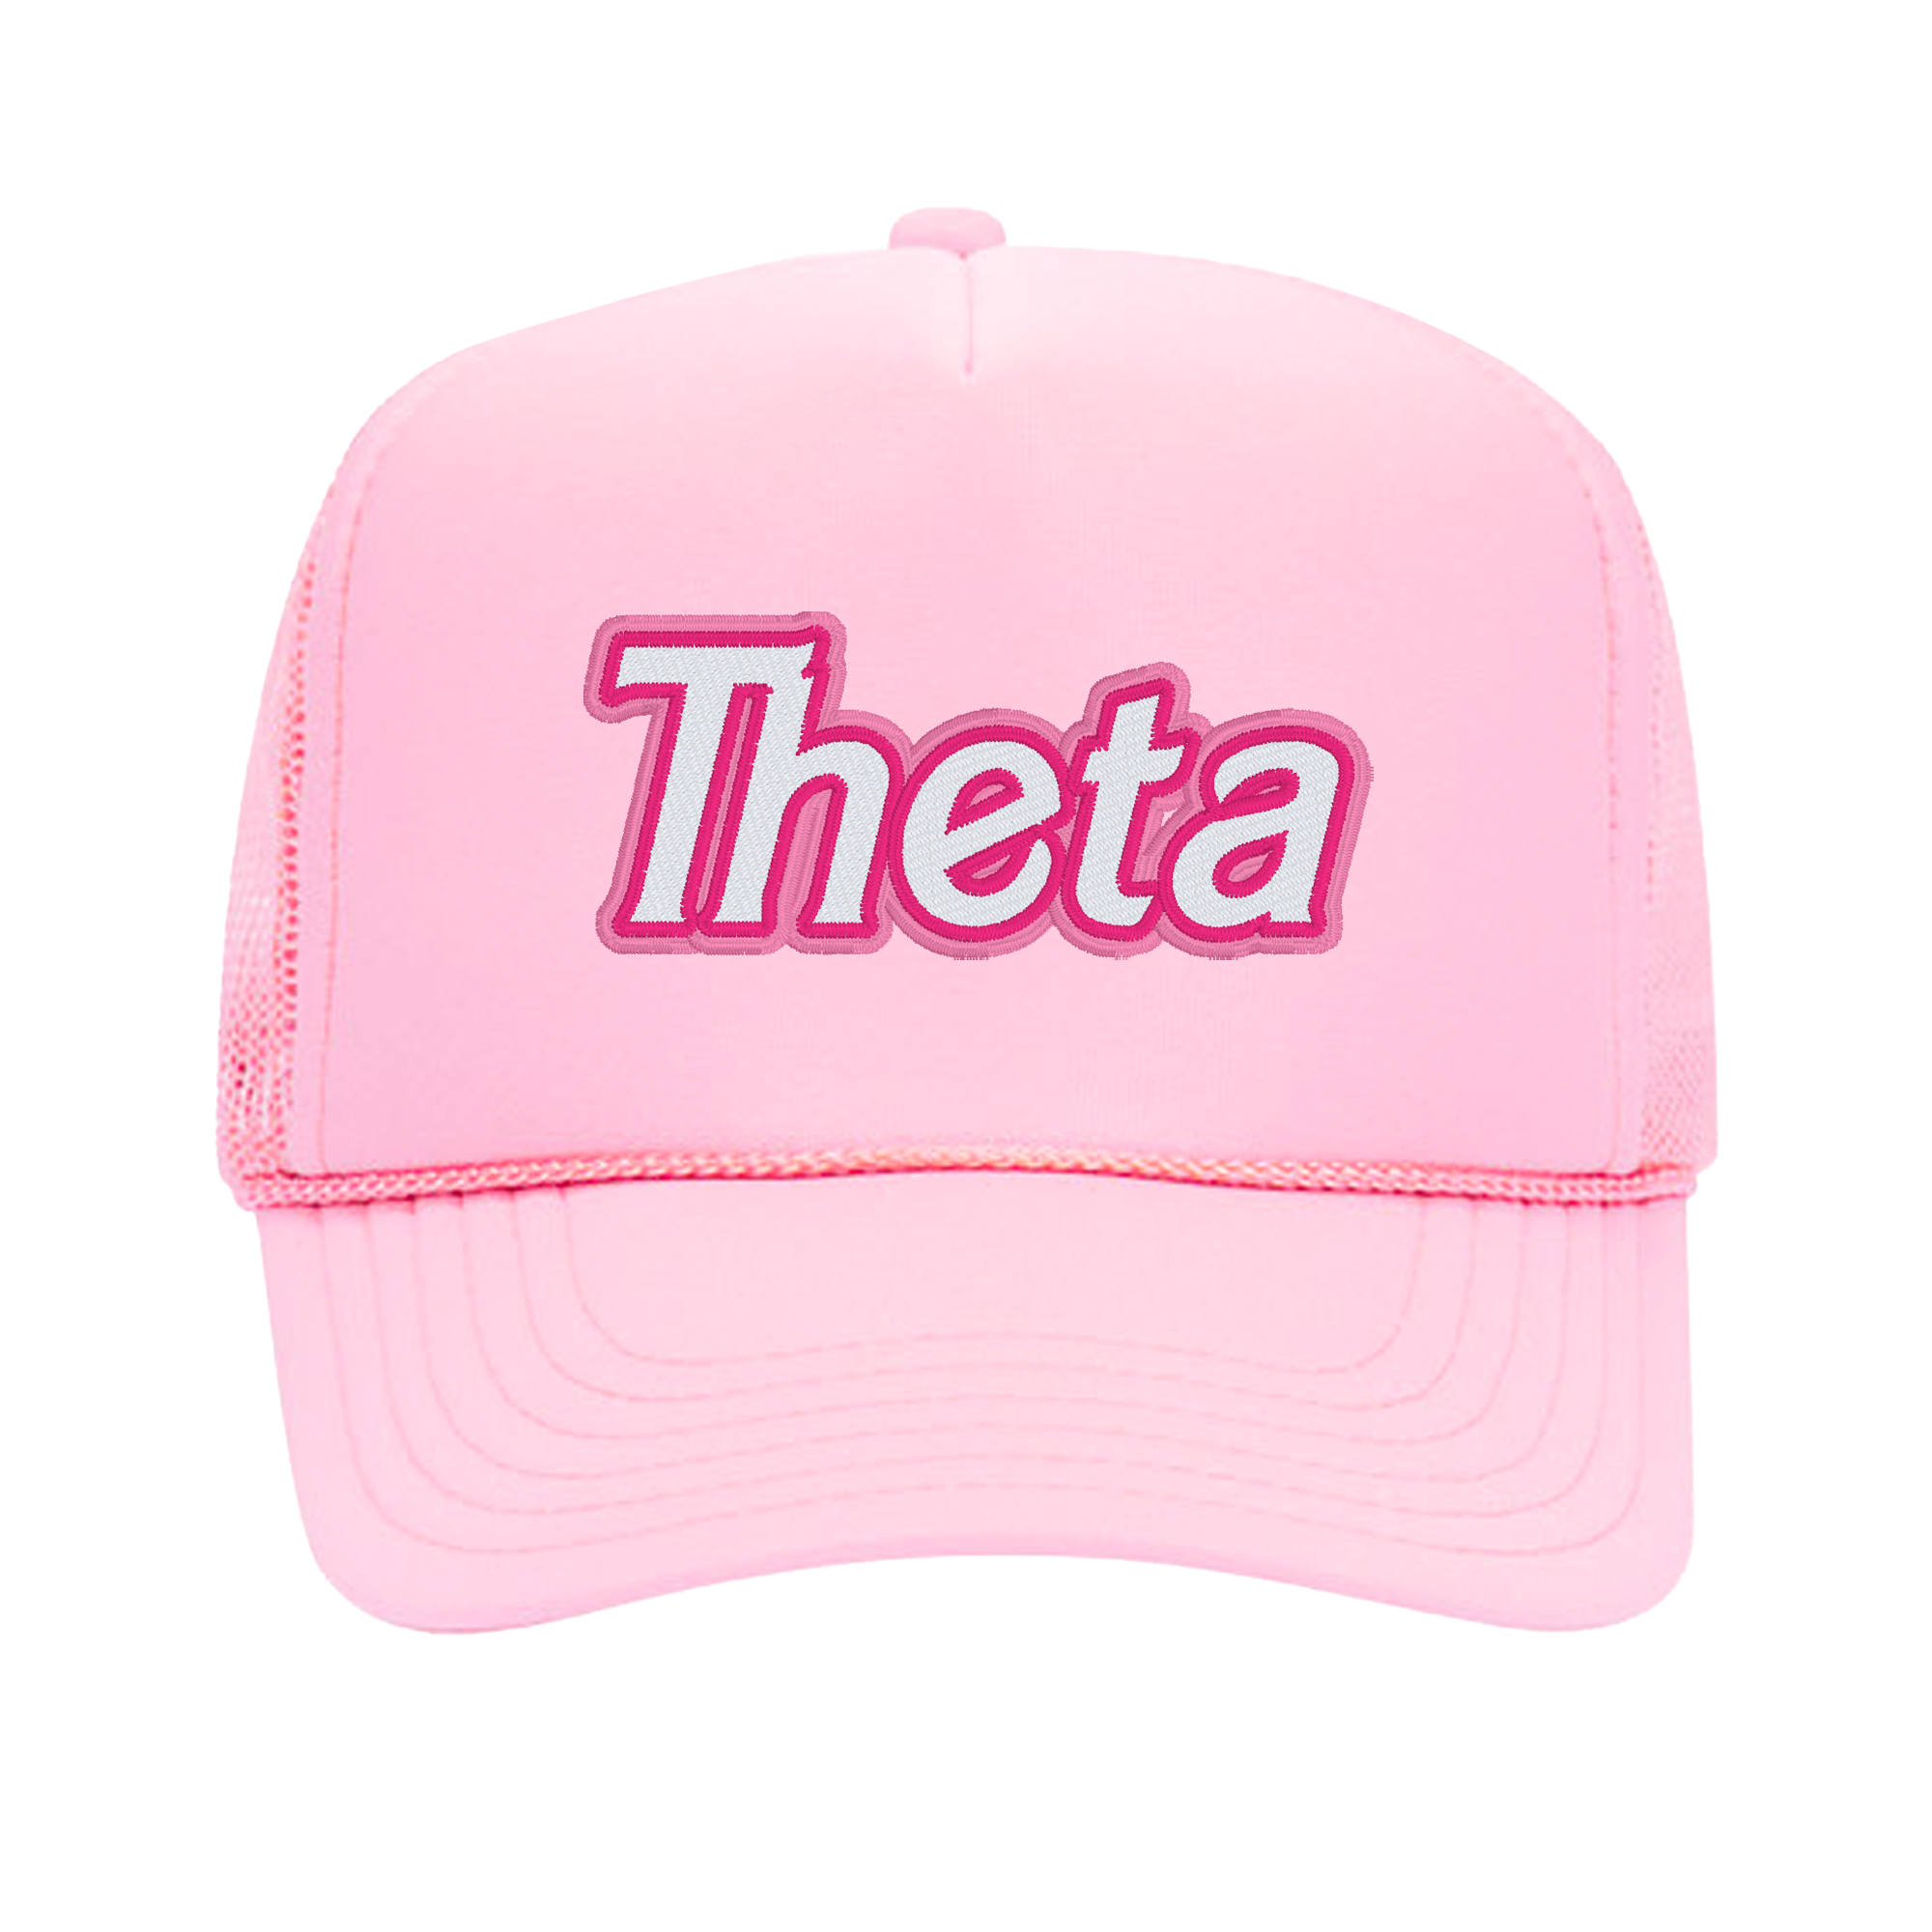 a pink hat with the word theta on it